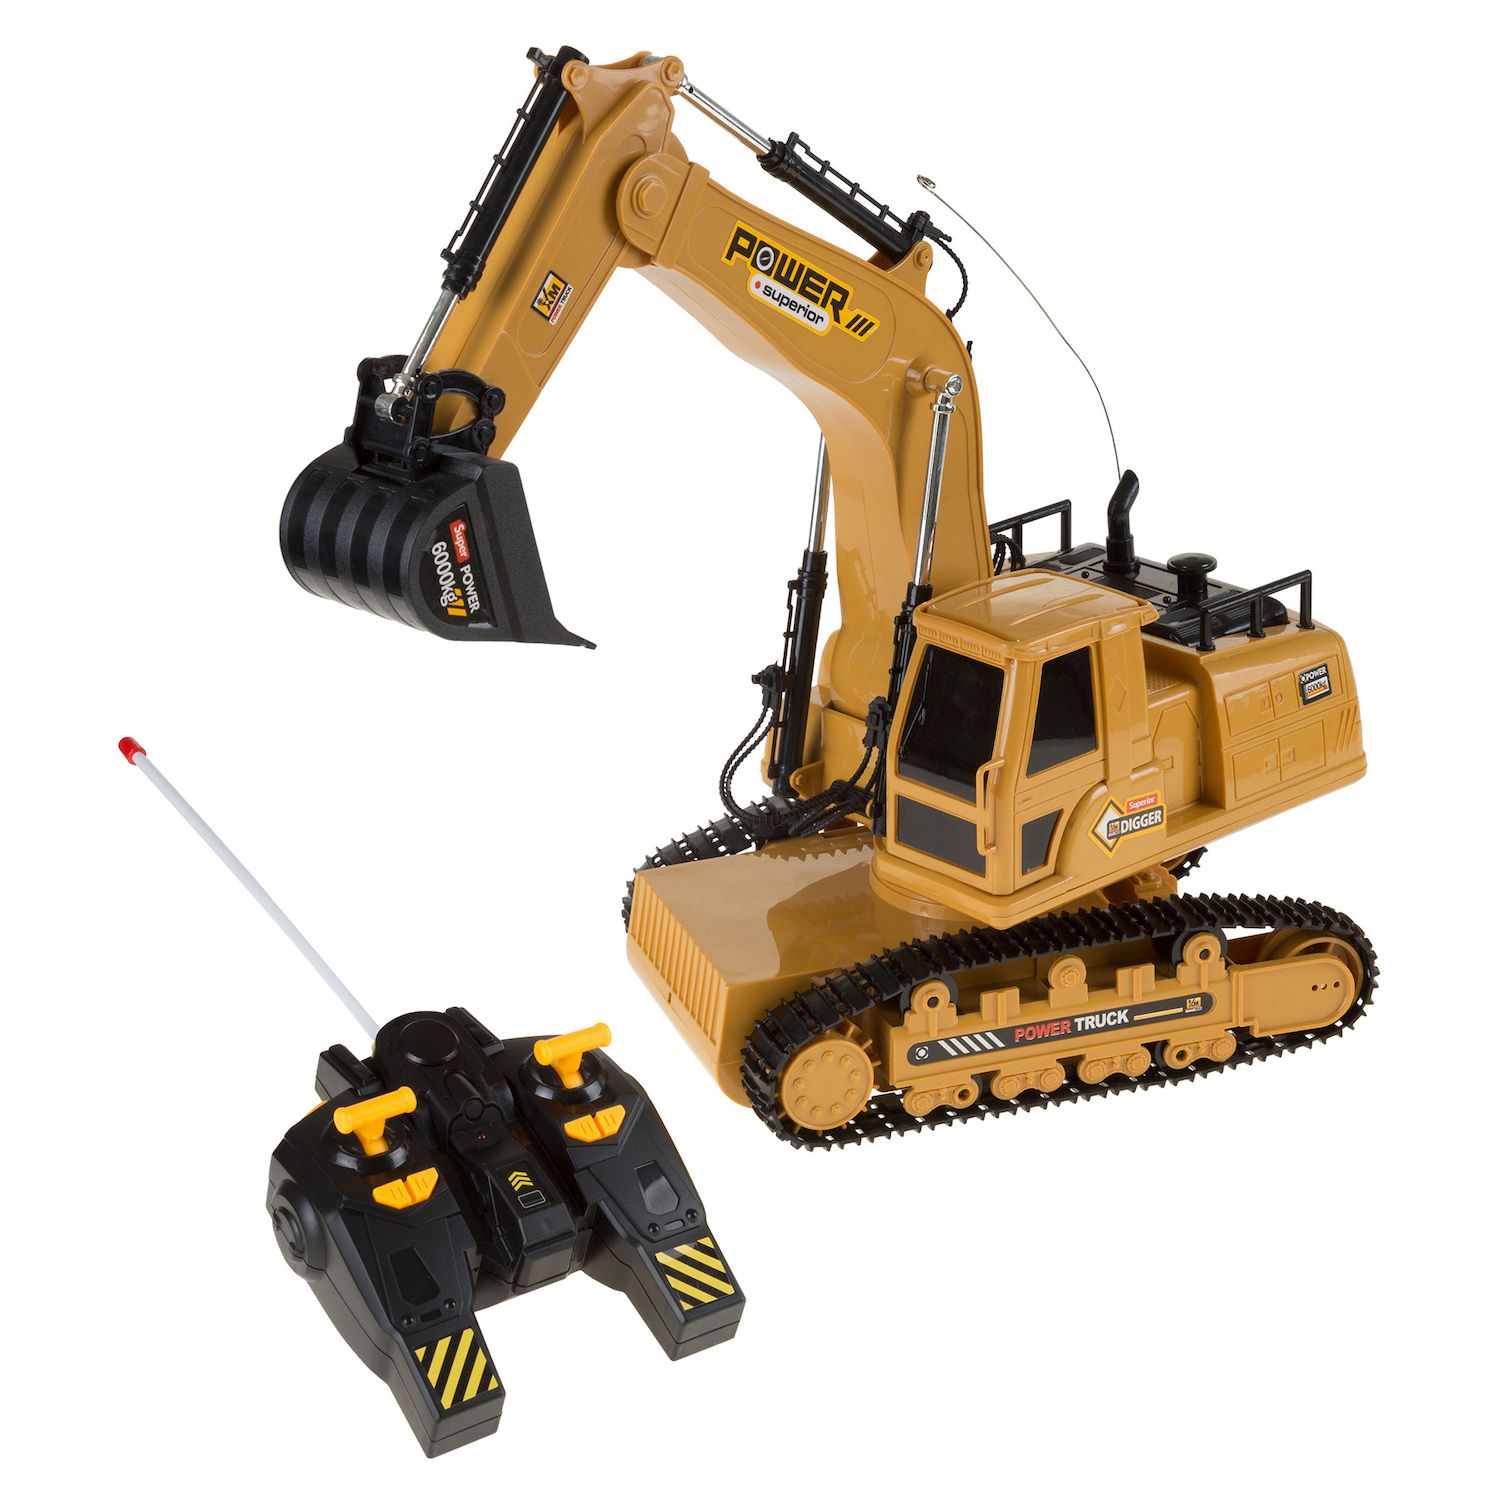 Image for Hey! Play! Remote Control Tractor Excavator Construction Toy at Kohl's.